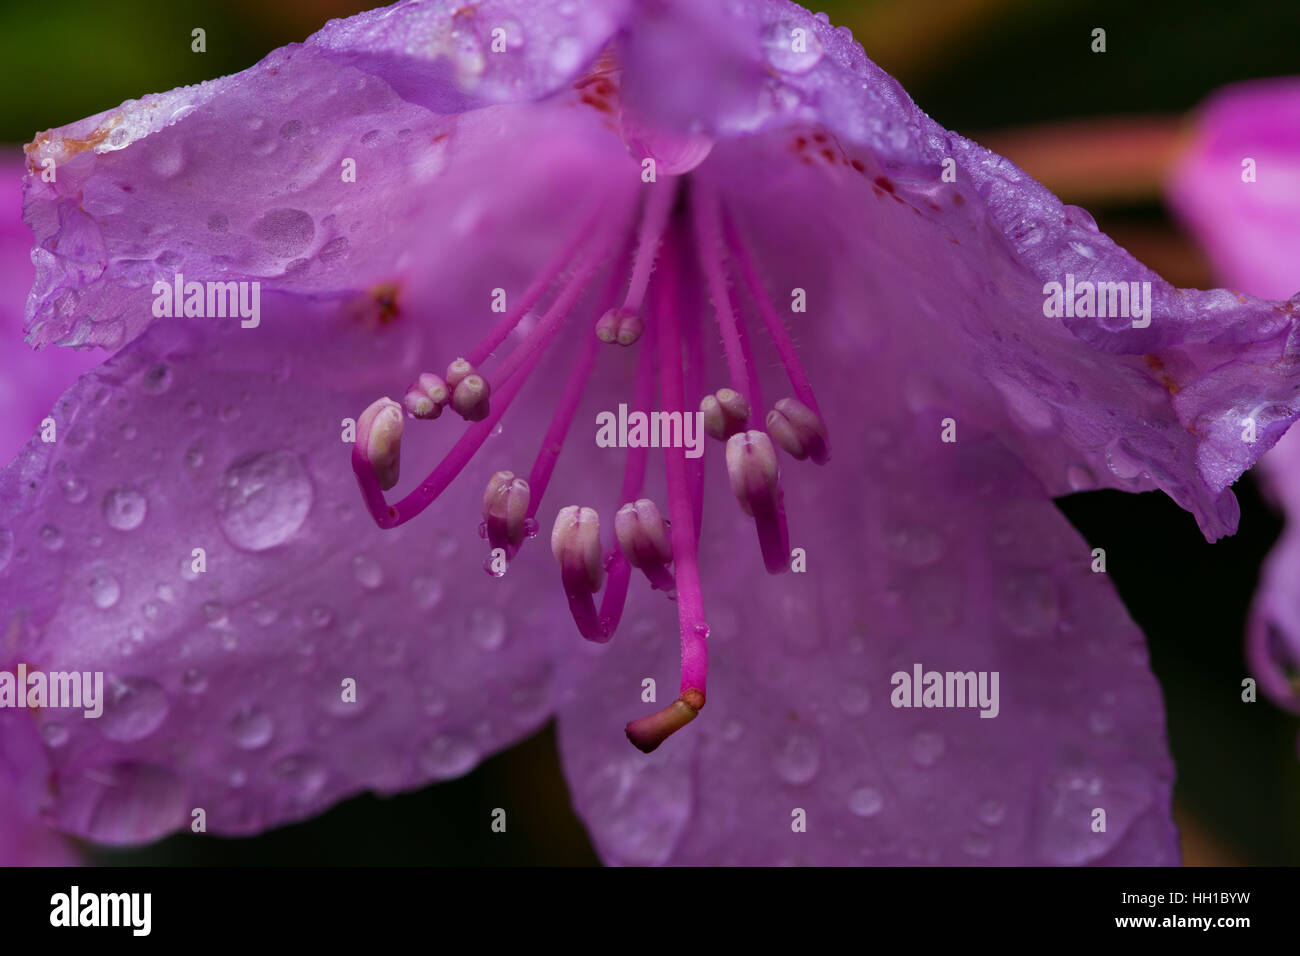 Macro purple bloom of rhododendron with water drops Stock Photo